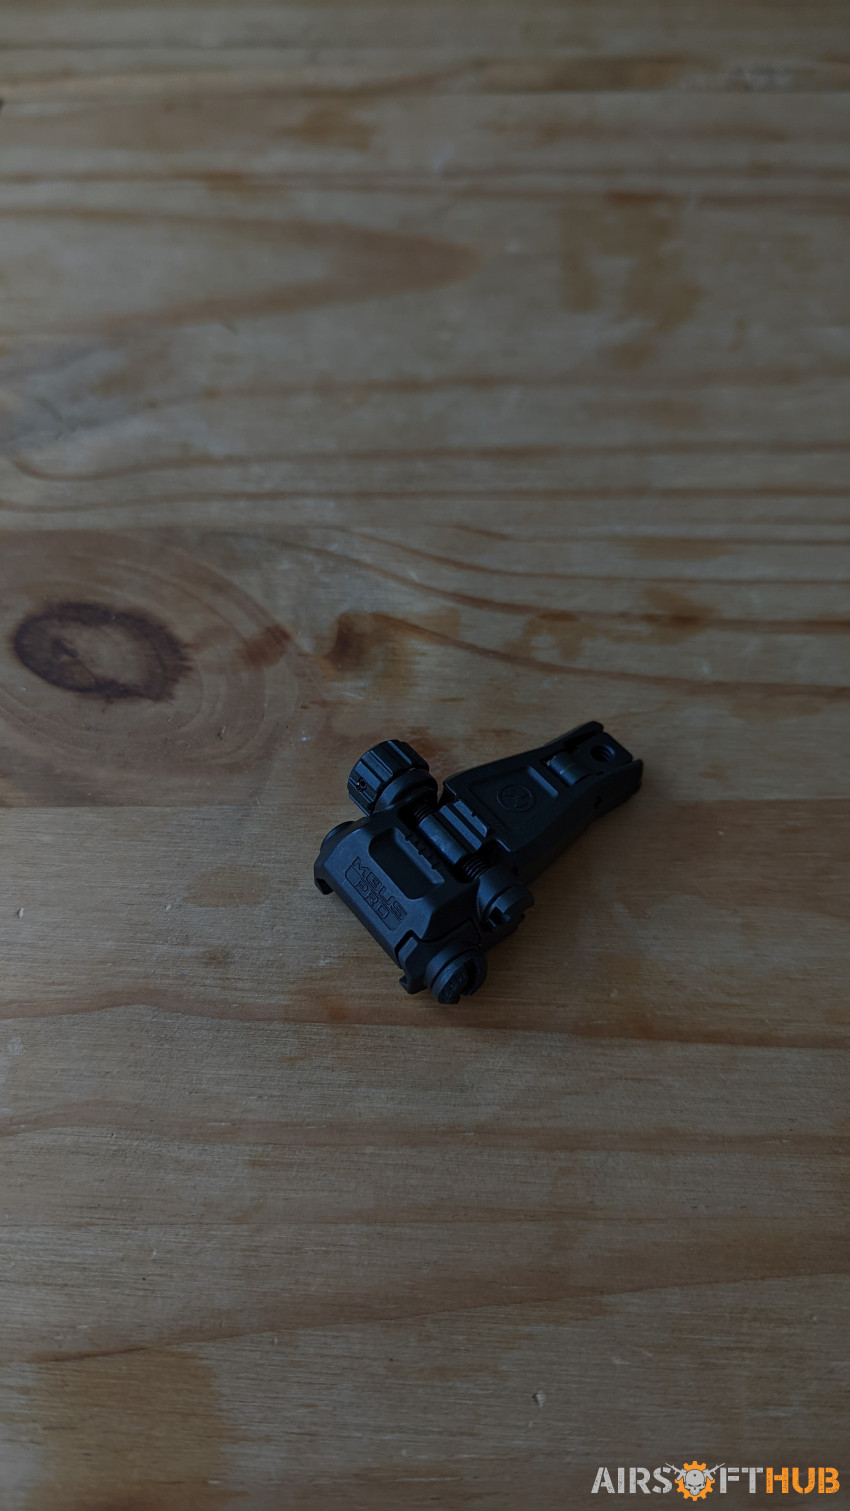 Magpul MBUS Pro Rear Sight - Used airsoft equipment